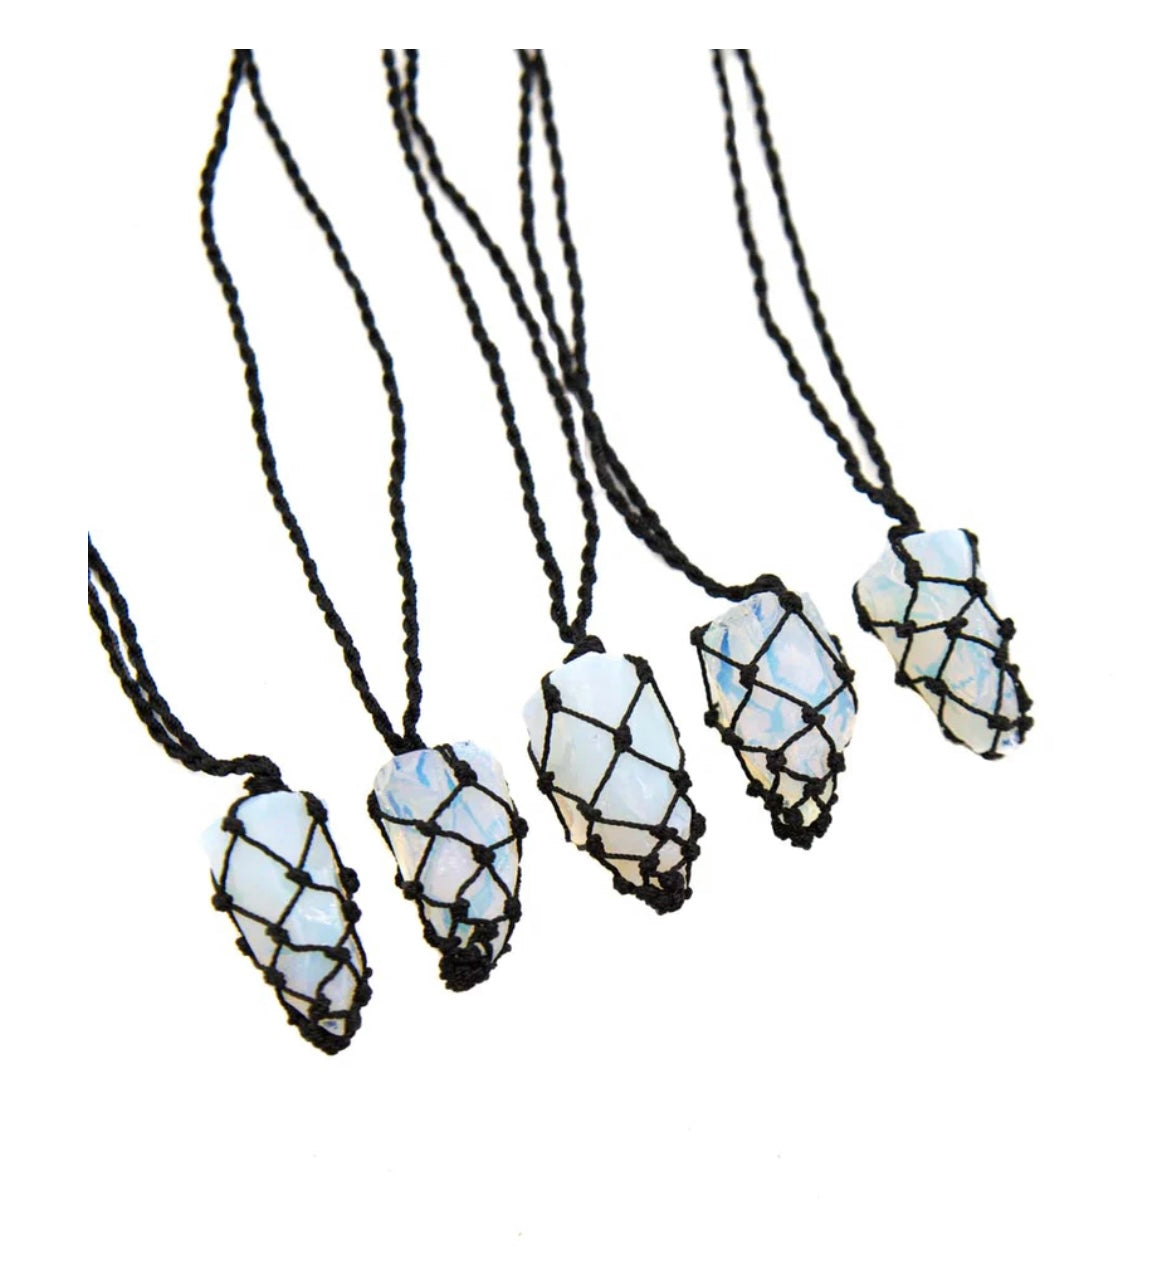 Uniquely crafted Hemp Macramé necklace with Opalite crystal